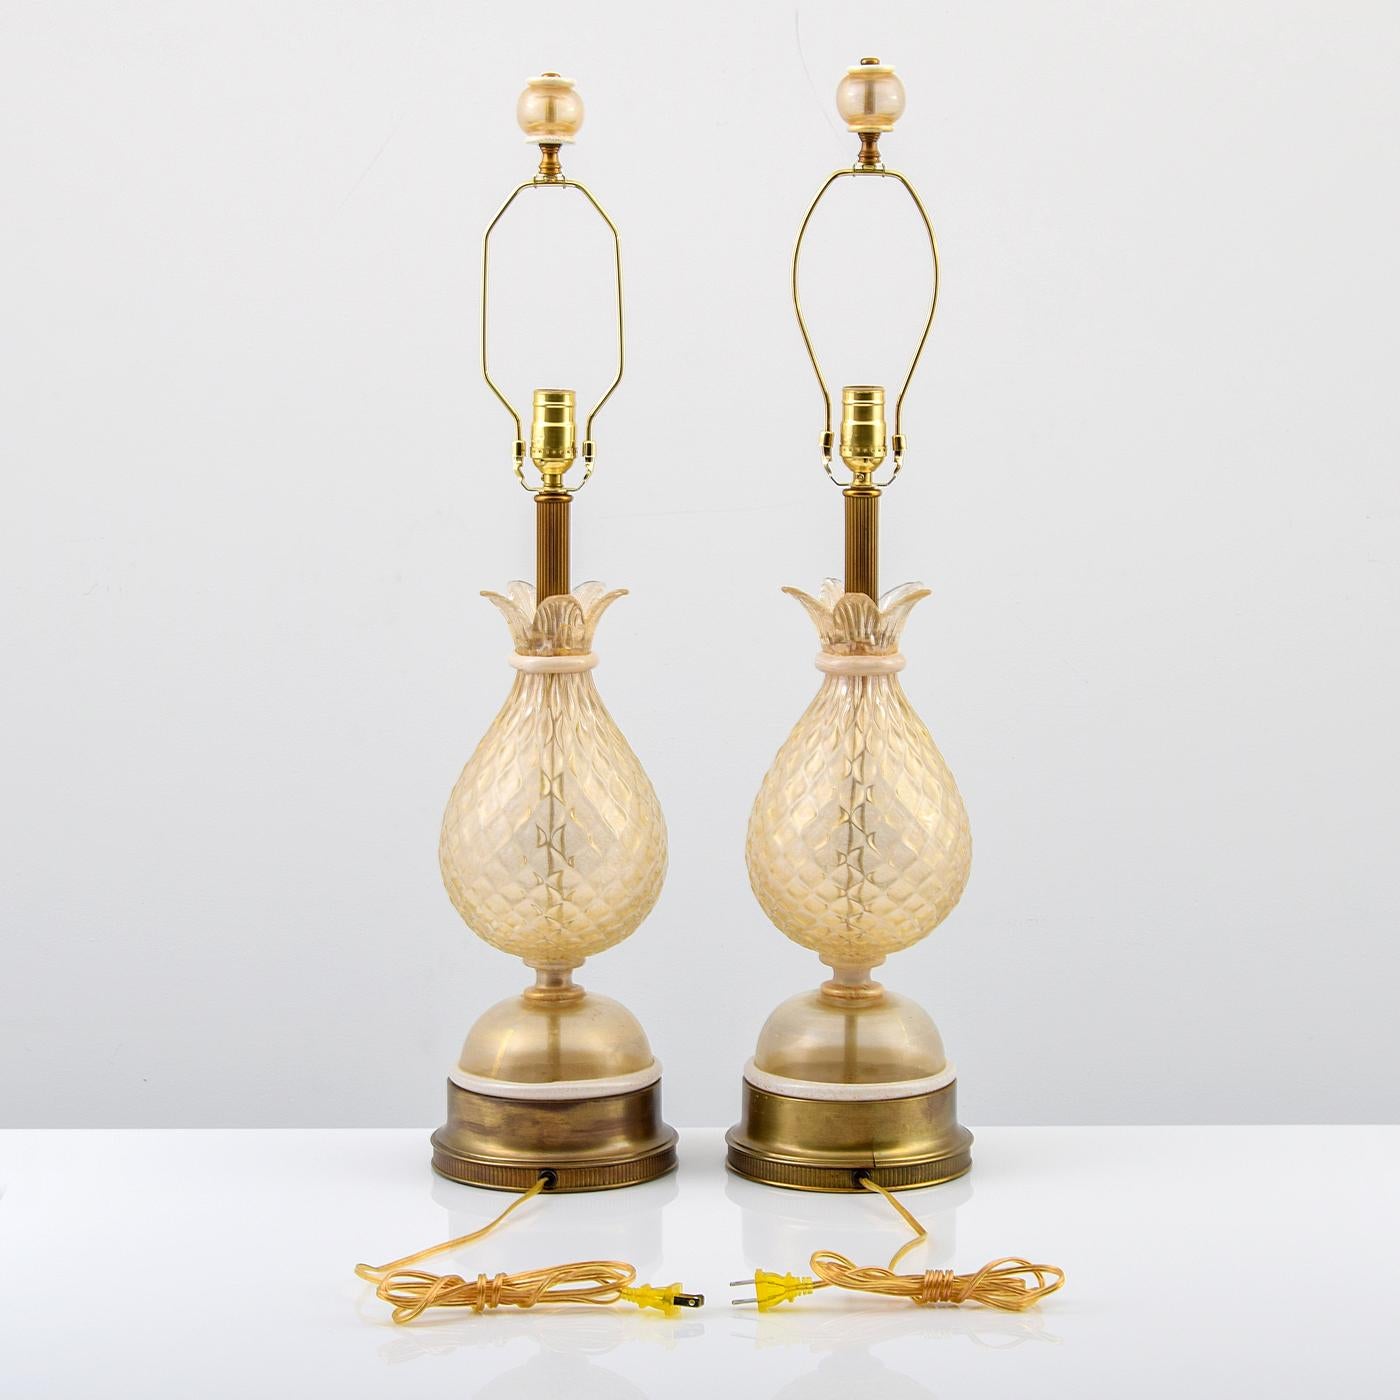 Metal Pair of Lamps Attributed to Barovier & Toso For Sale